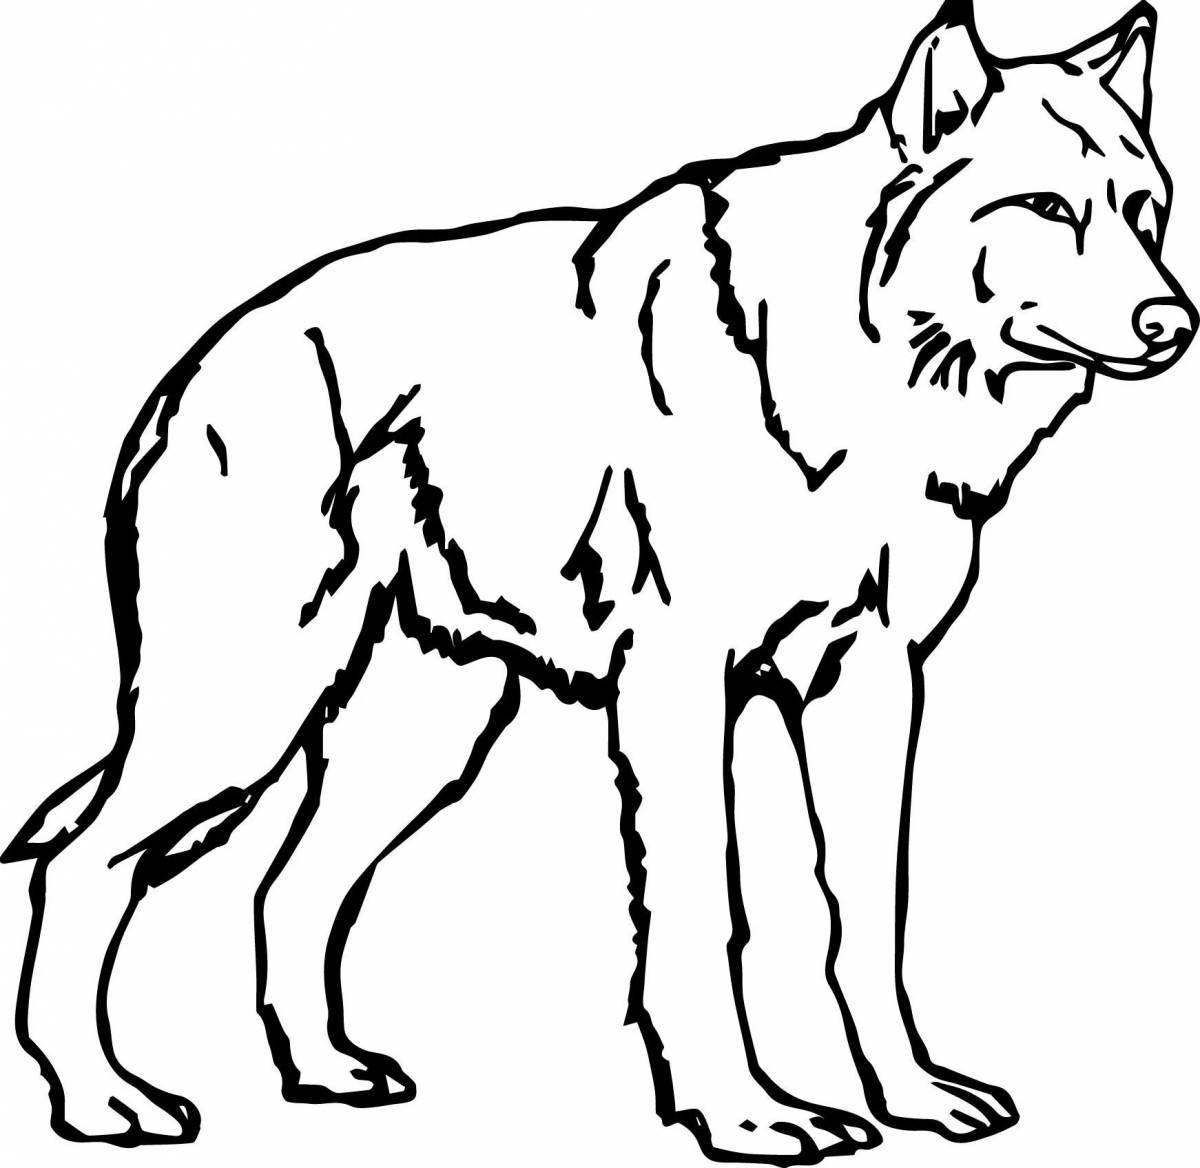 Statuary wolf coloring book for children 6-7 years old